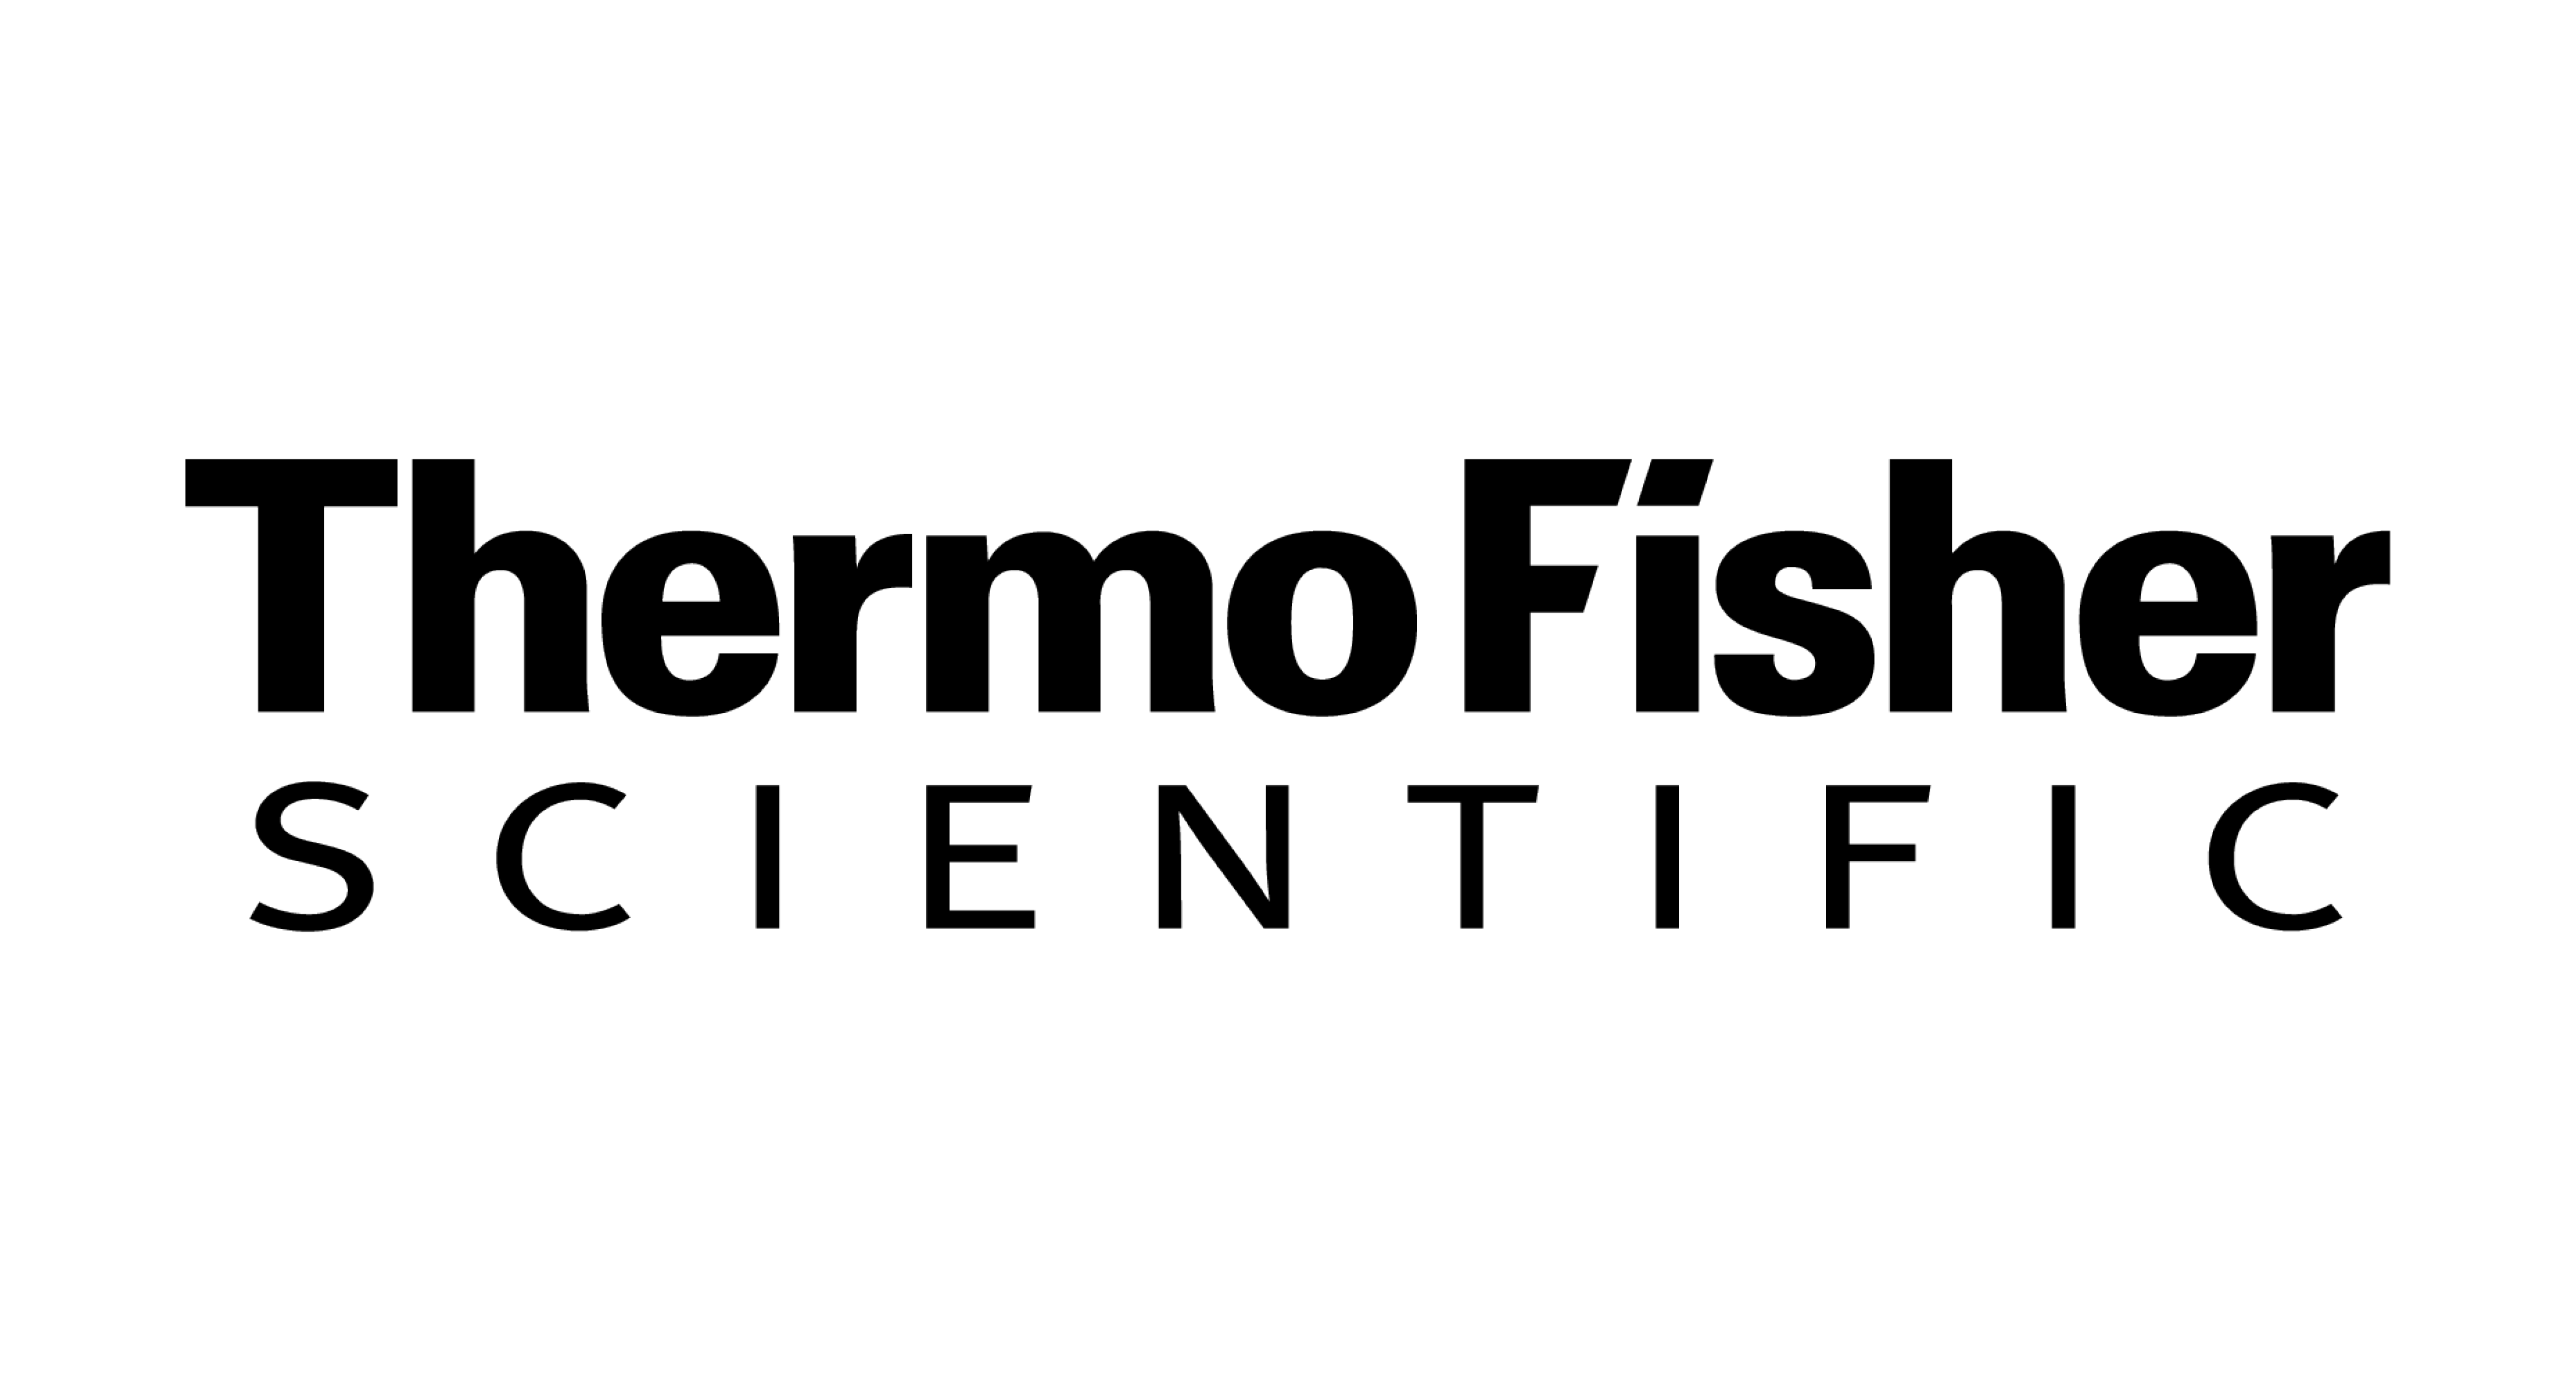 Thermo Fisher Scientific is a global leader in allergy and autoimmunity diagnostics